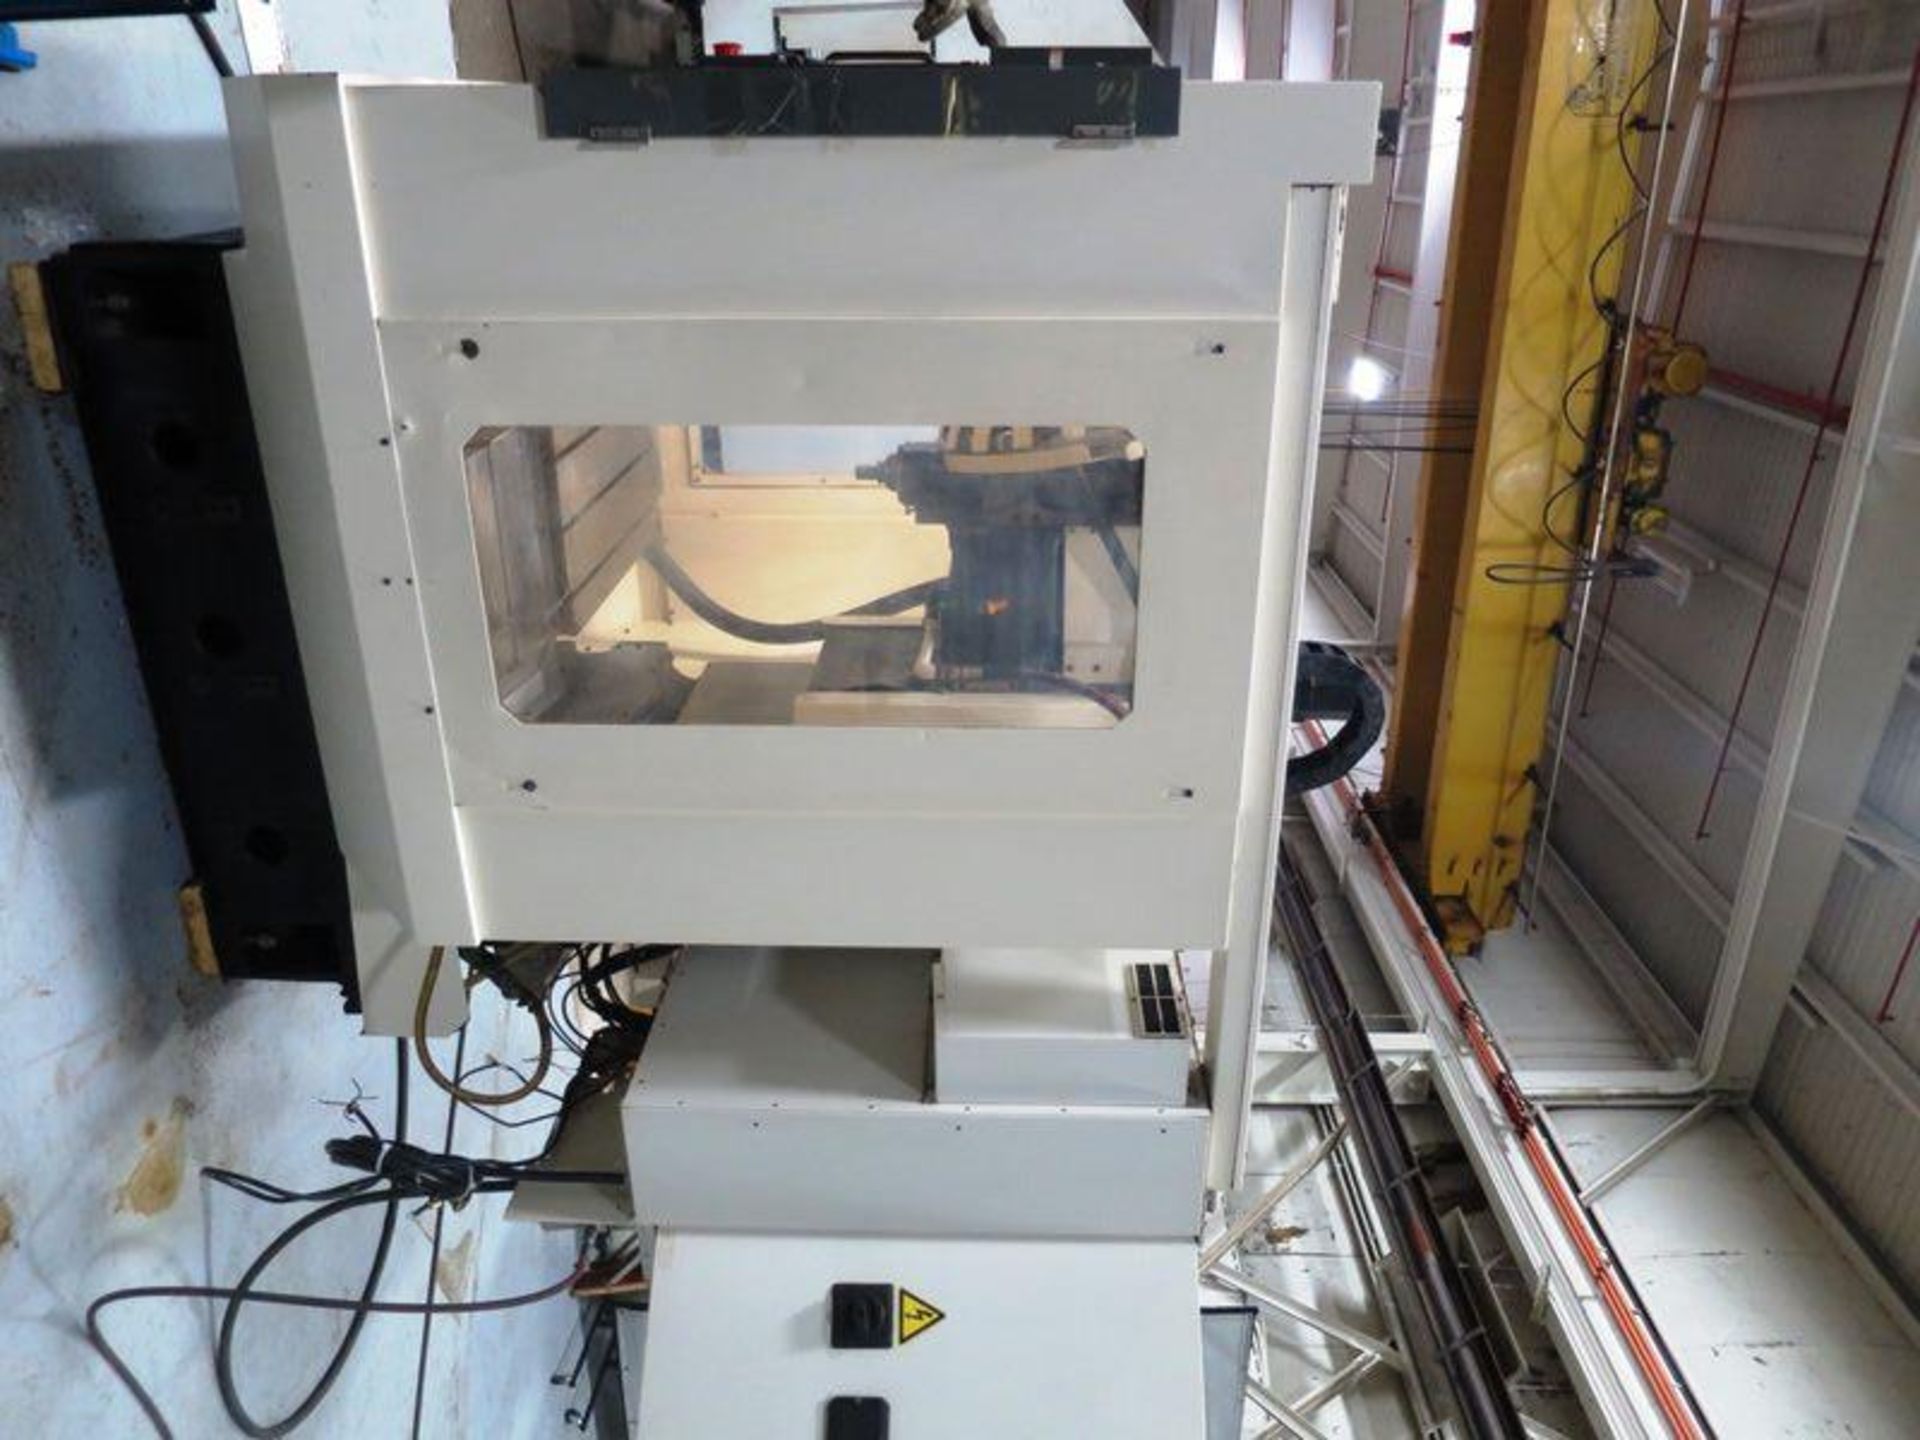 Fanuc Robodrill Alpha T21iDE 3-Axis Vertical High Speed Drill Tap Machining Center, S/N PO8UR381 - Image 8 of 12